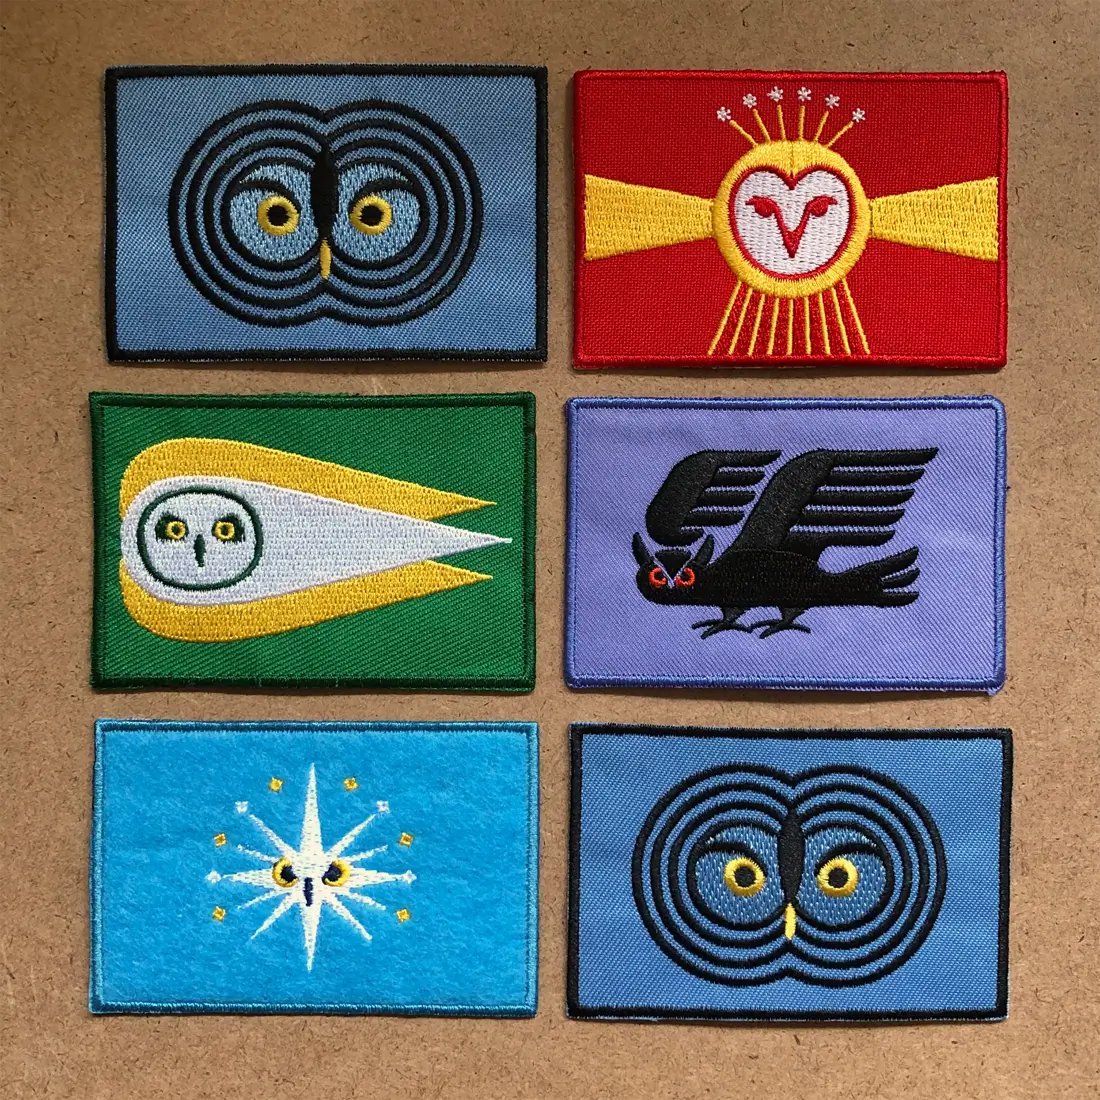 Image of Vexillowlogy Patches